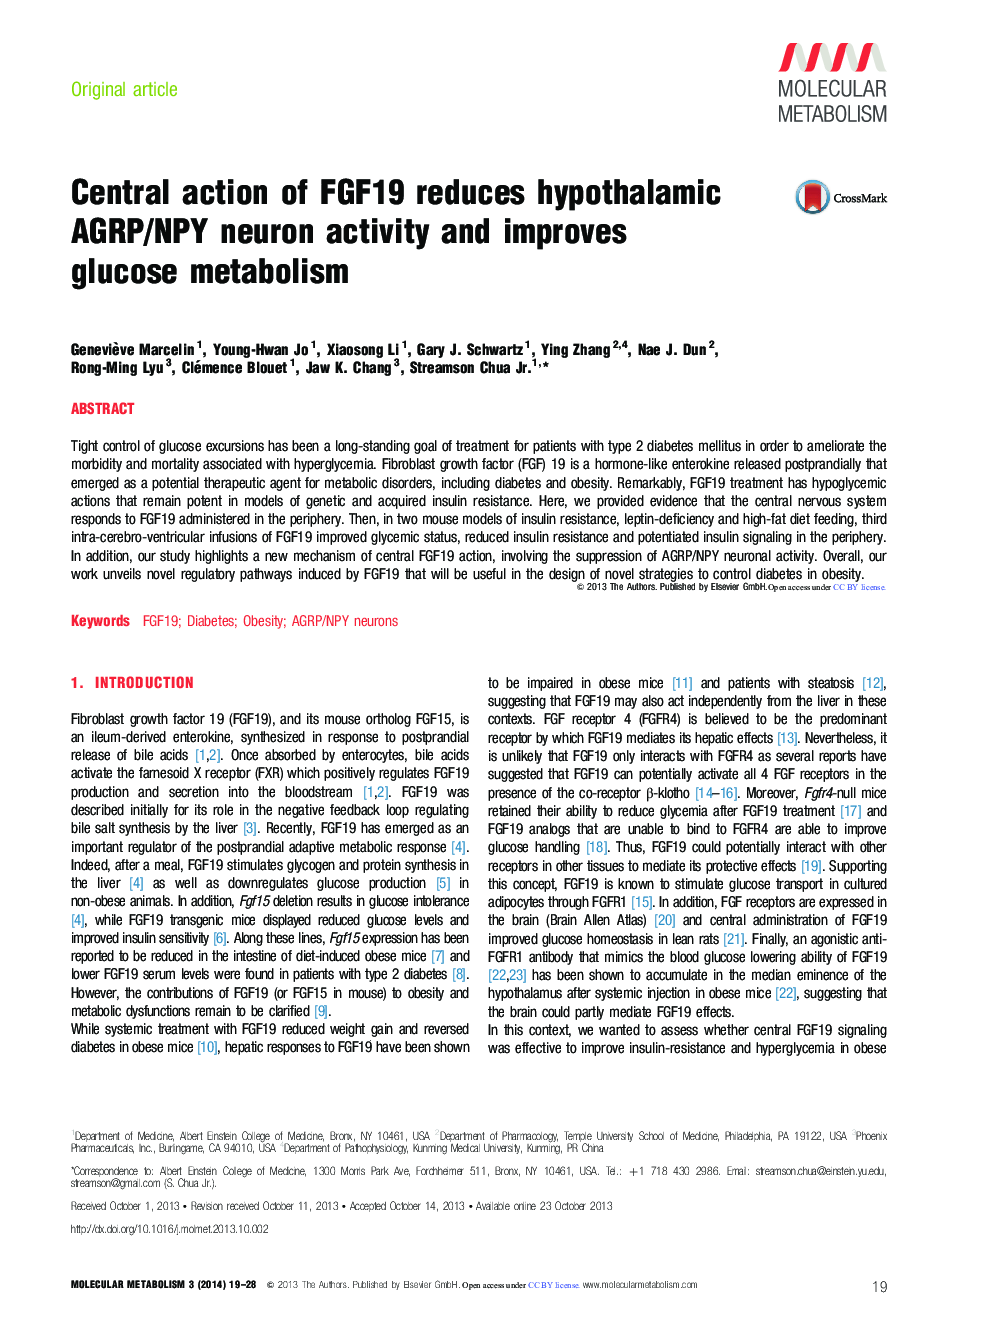 Central action of FGF19 reduces hypothalamic AGRP/NPY neuron activity and improves glucose metabolism